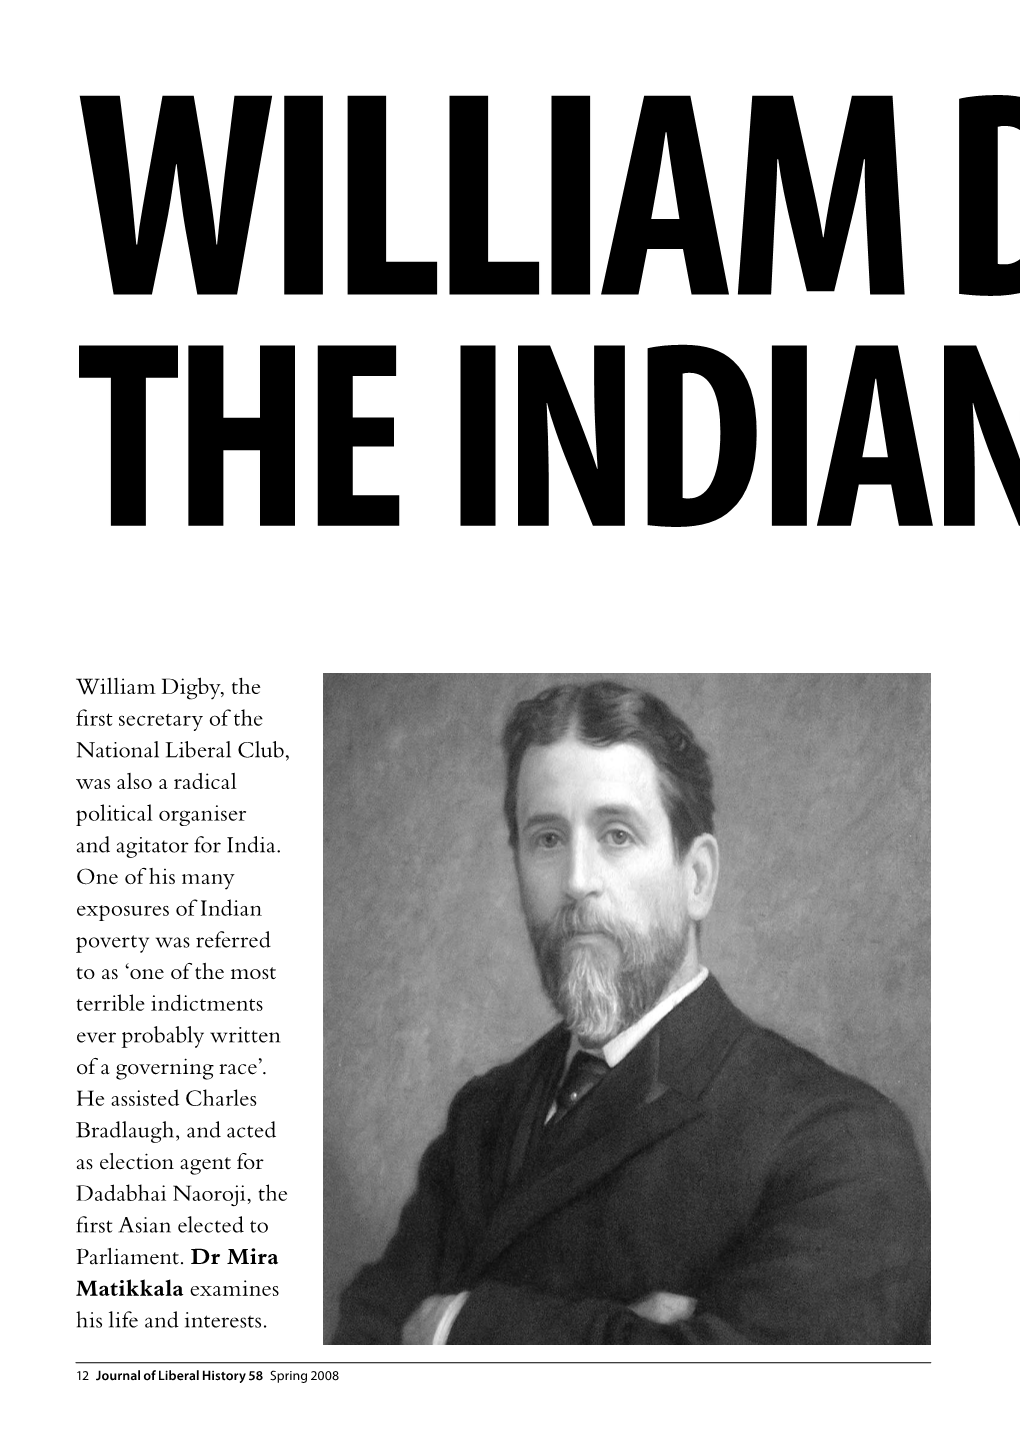 William Digby and the Indian Question